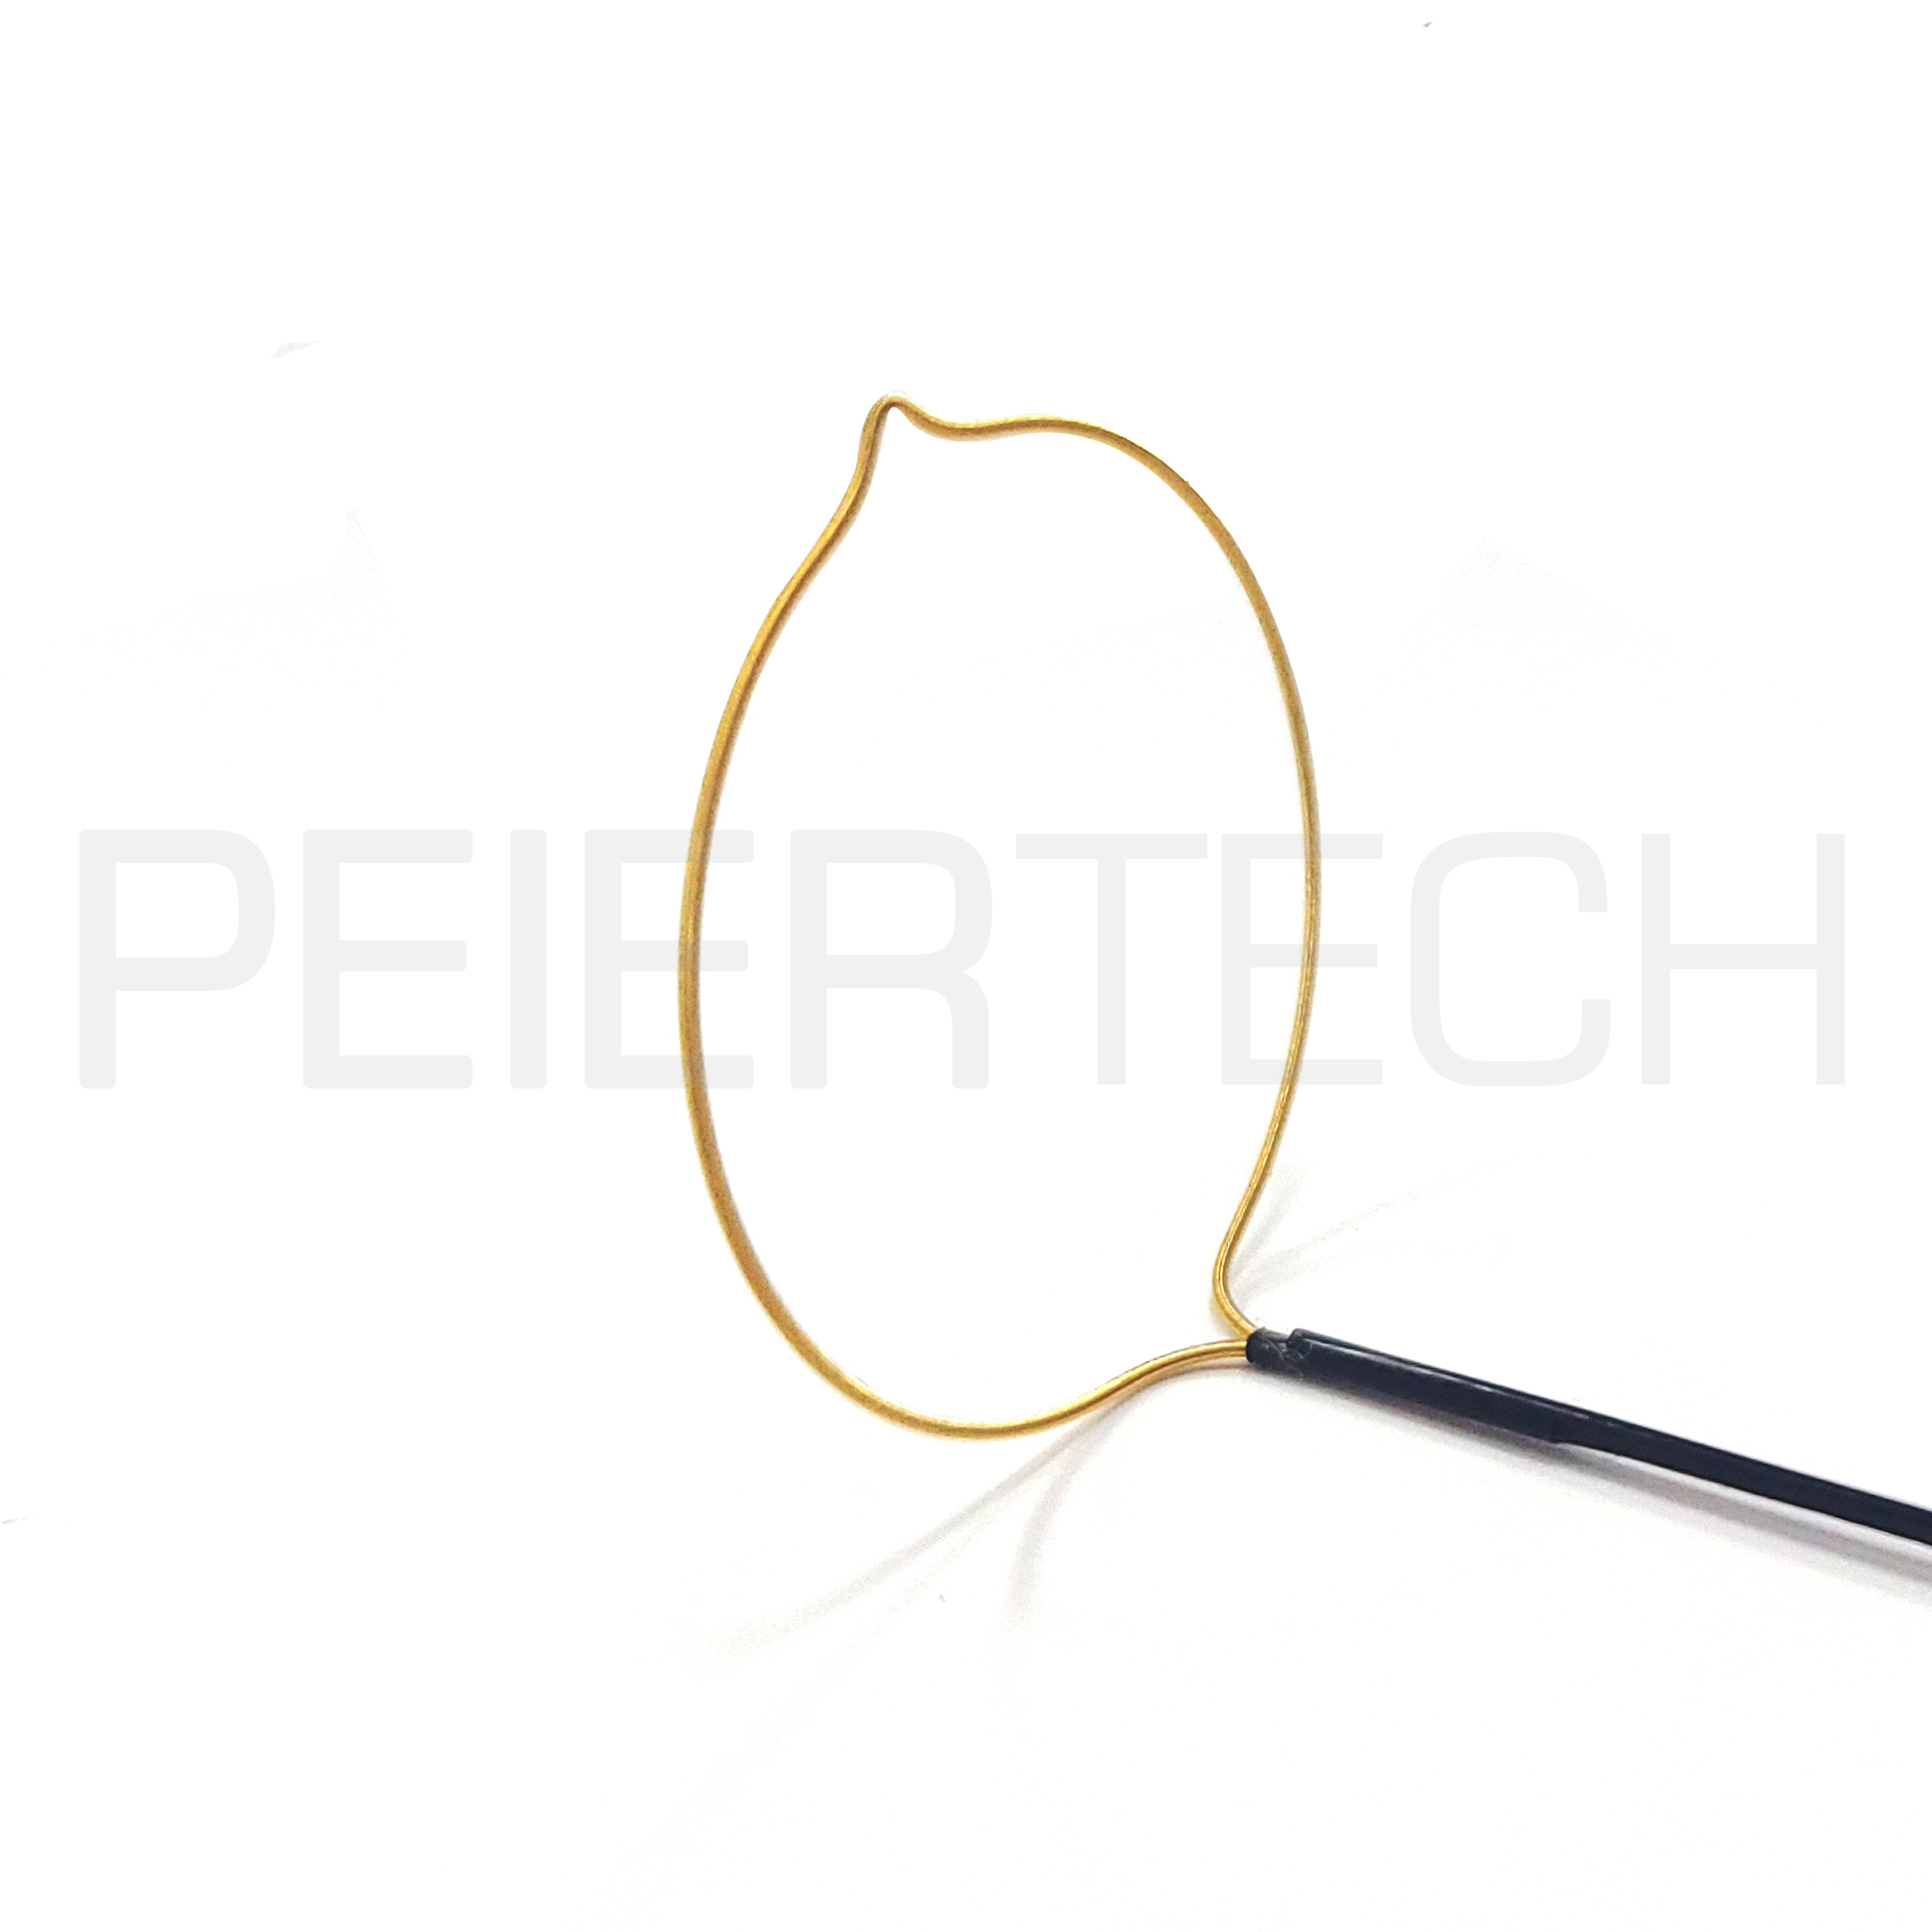 Nitinol Component Nitinol Catch Ring Proven High-Volume Performance, helps Customers reduce time to market We Do It All With Nitinol